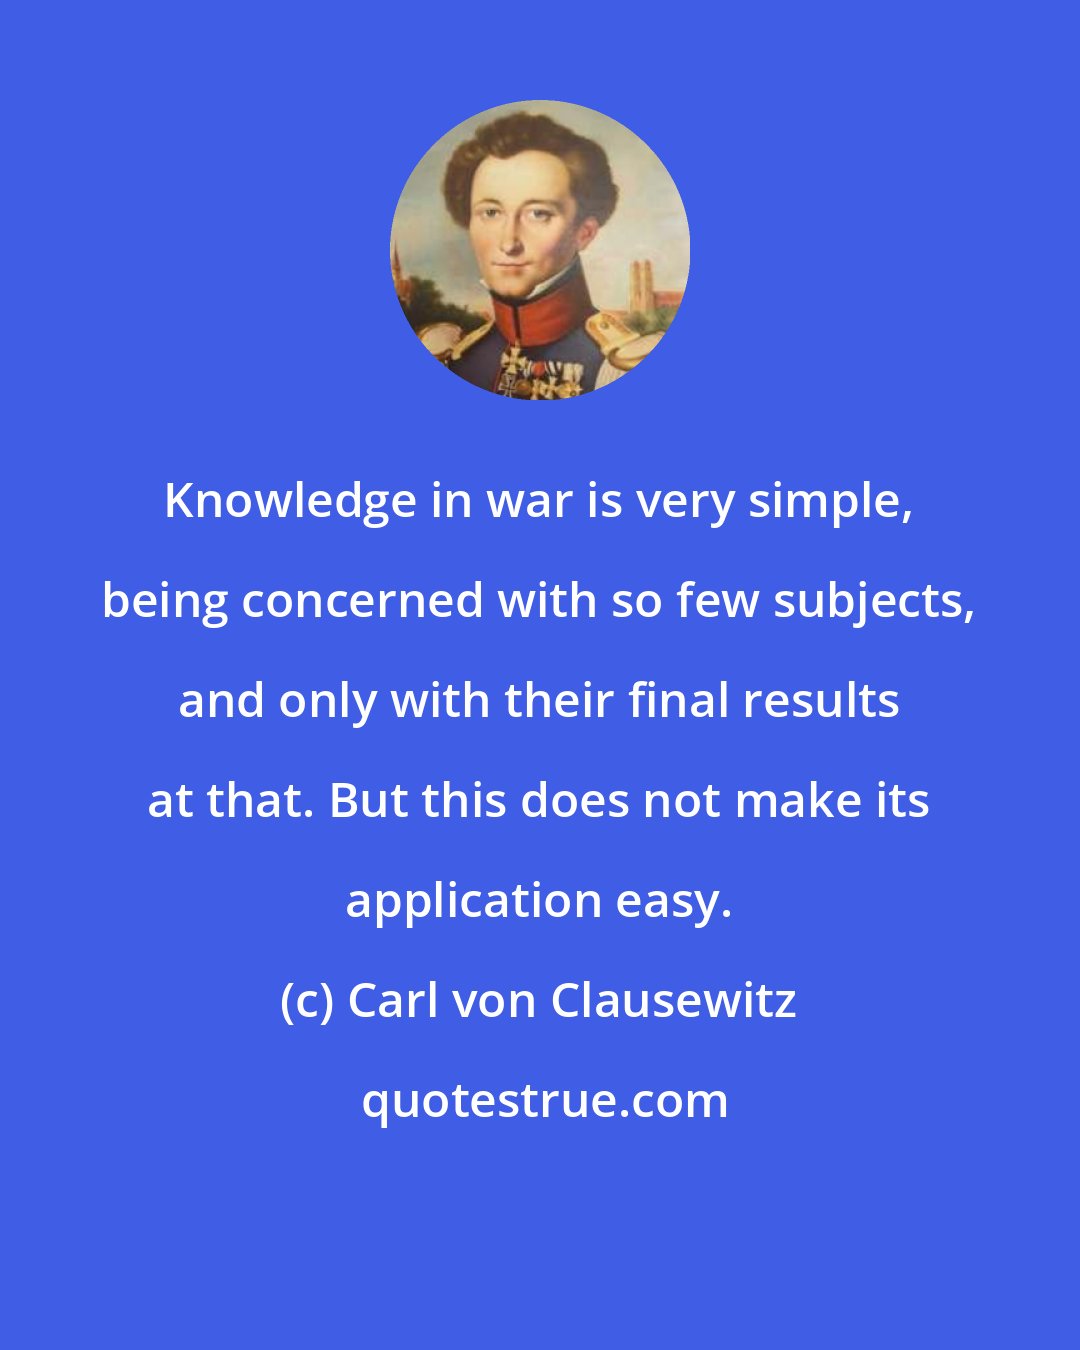 Carl von Clausewitz: Knowledge in war is very simple, being concerned with so few subjects, and only with their final results at that. But this does not make its application easy.